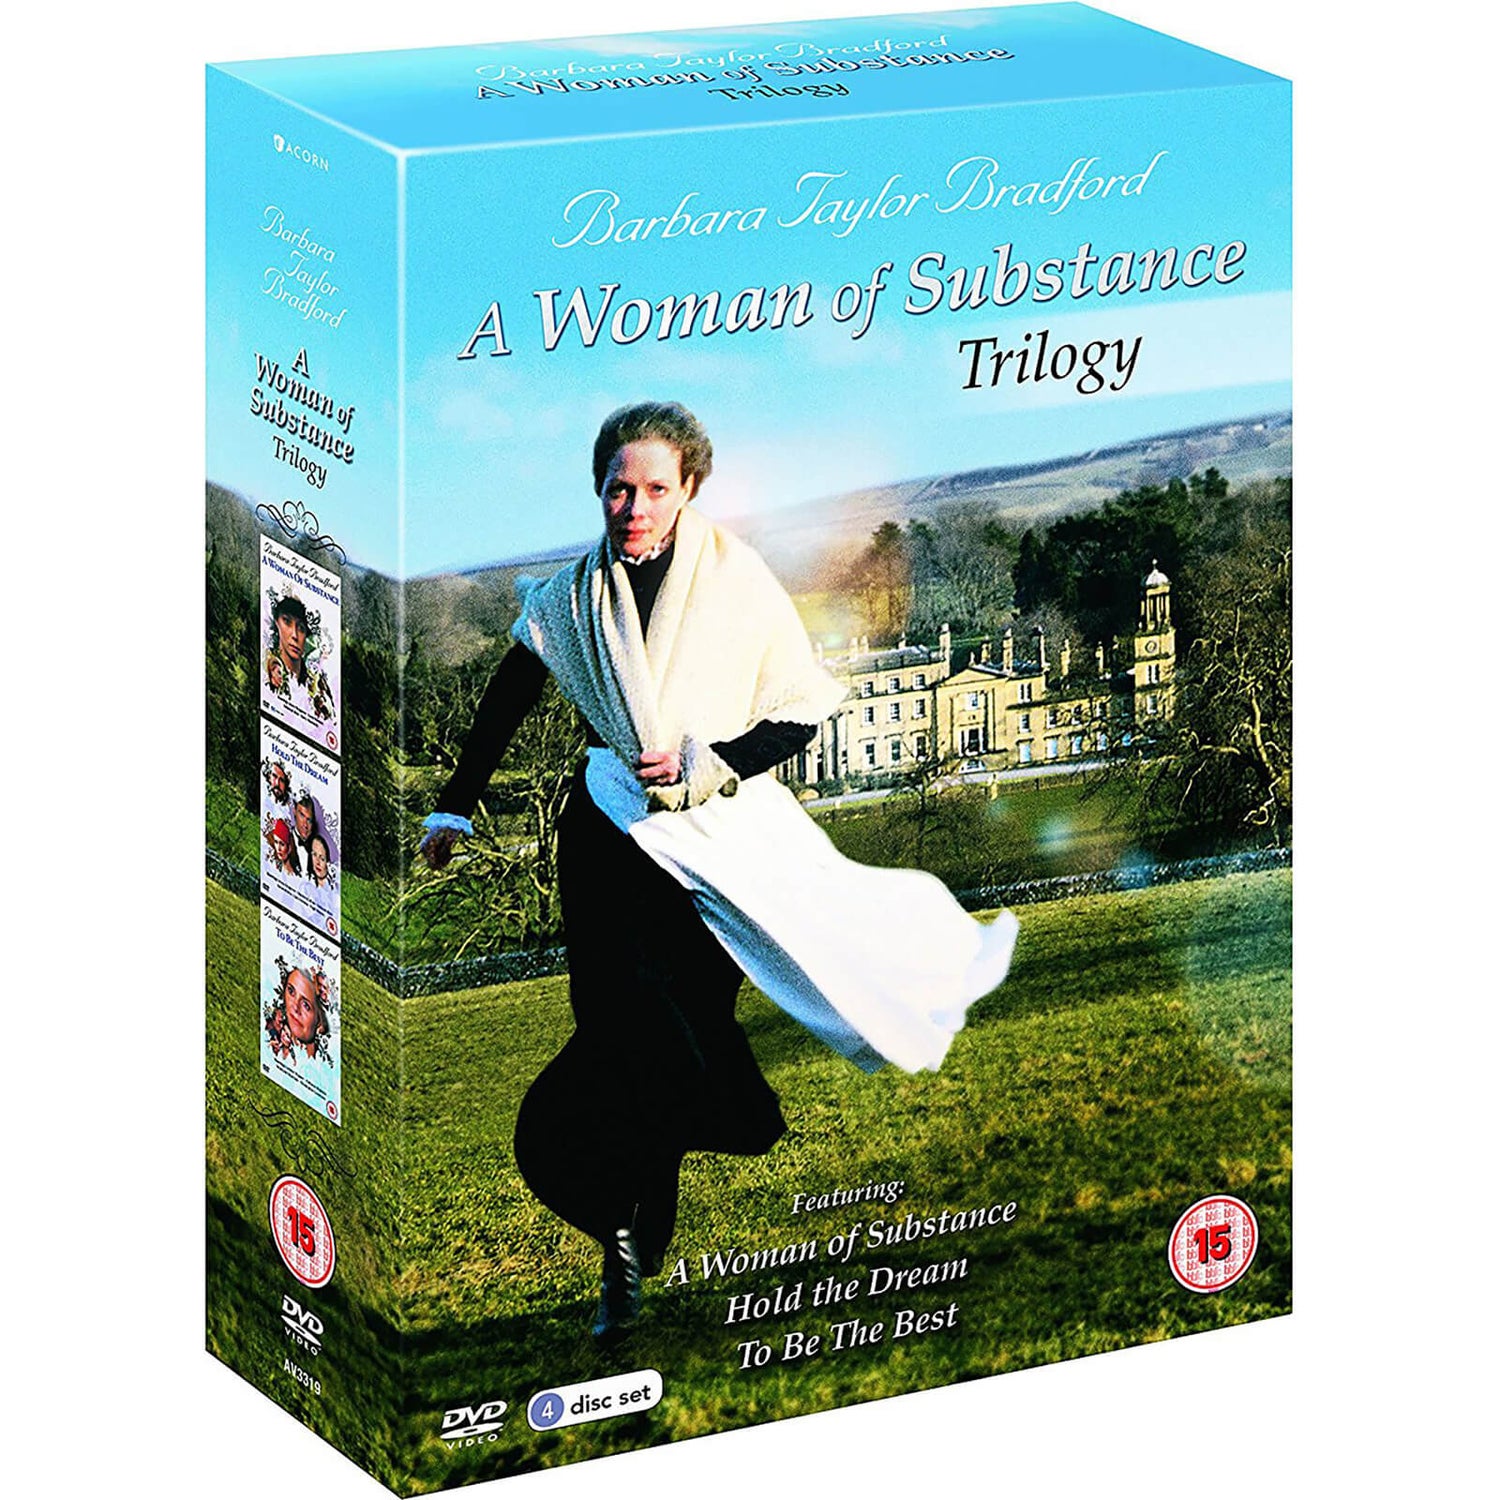 A Woman of Substance Trilogy